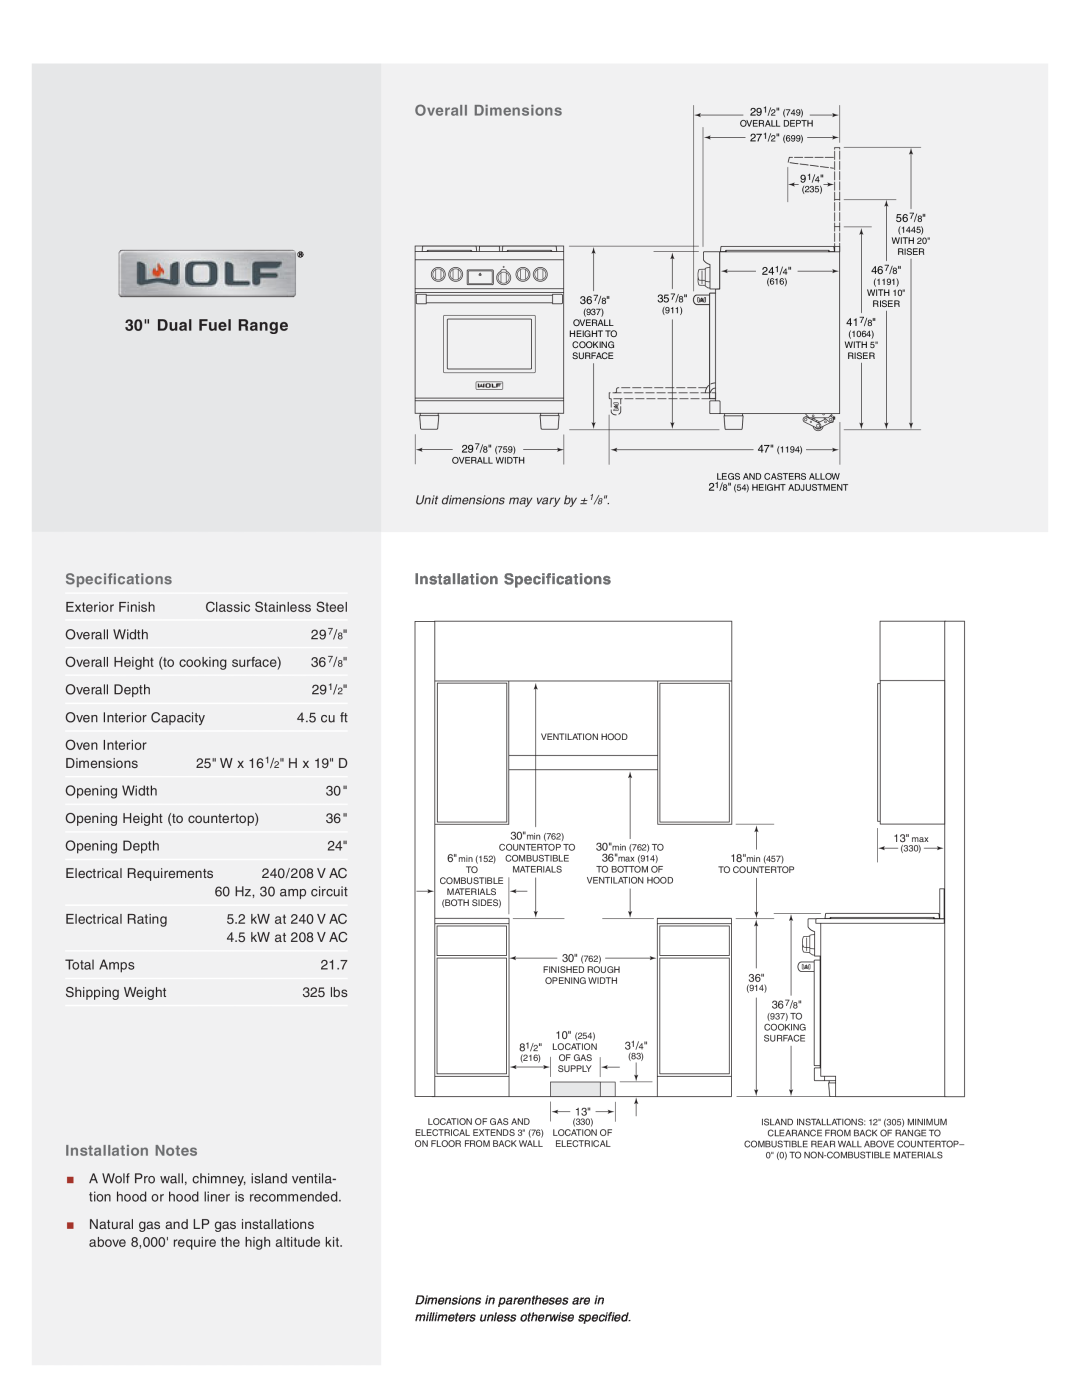 Wolf Appliance Company DF304 Overall Dimensions, Installation Notes, Installation Specifications, Dual Fuel Range 